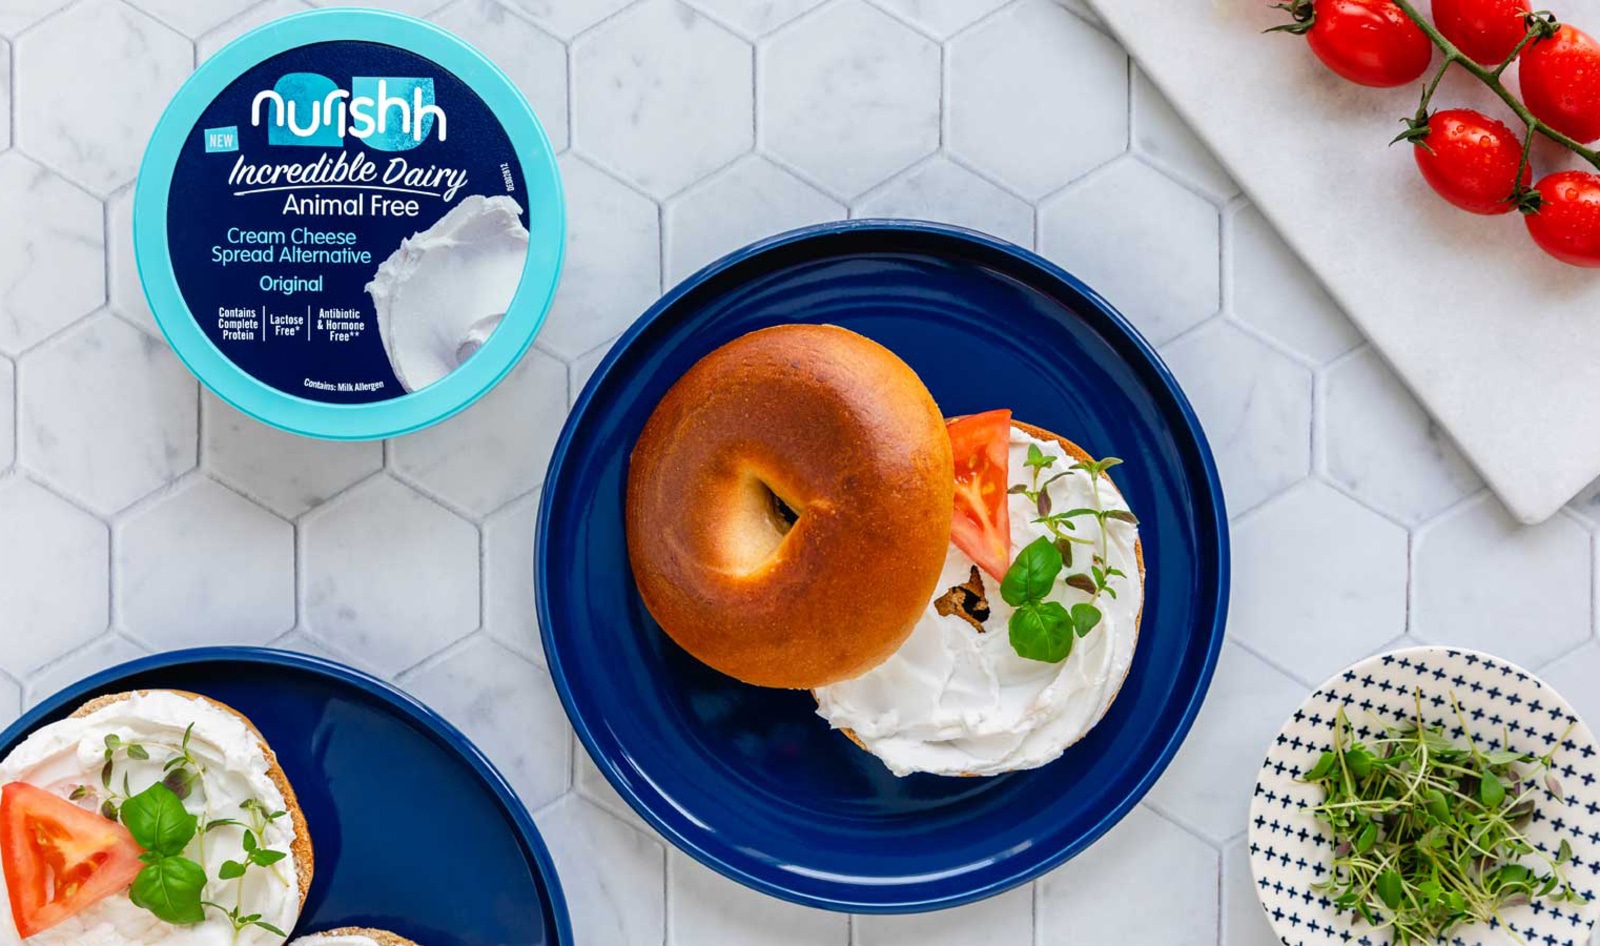 This Brand Will Give You $200 to Switch to Vegan Cream Cheese